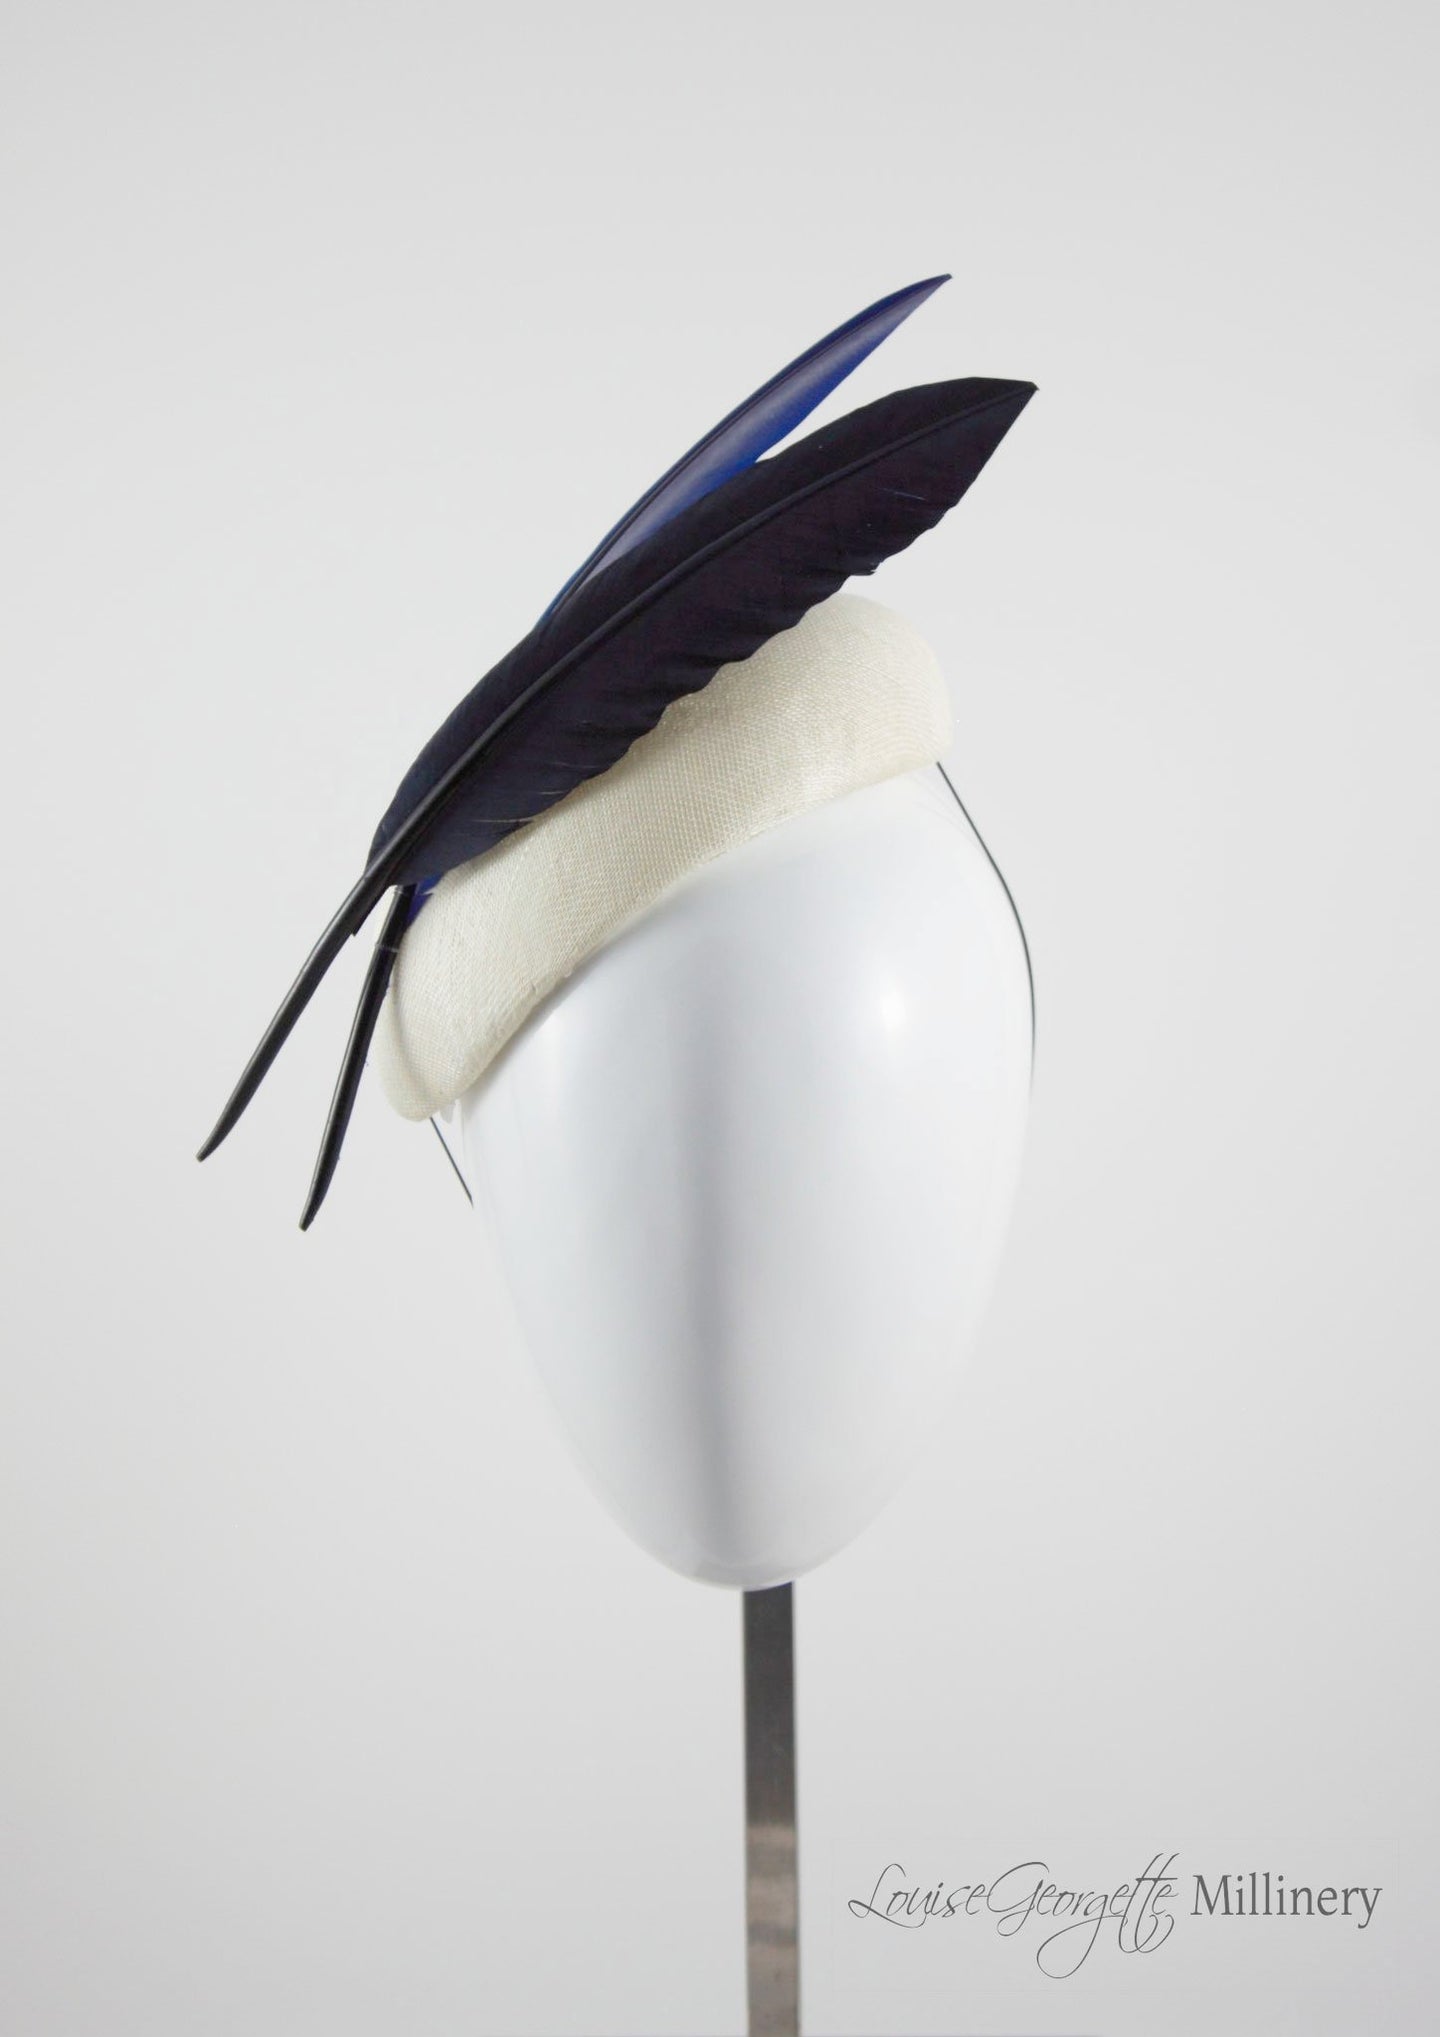 Ivory beret style ladies hat with two quills. Front view. Handmade millinery made in London.